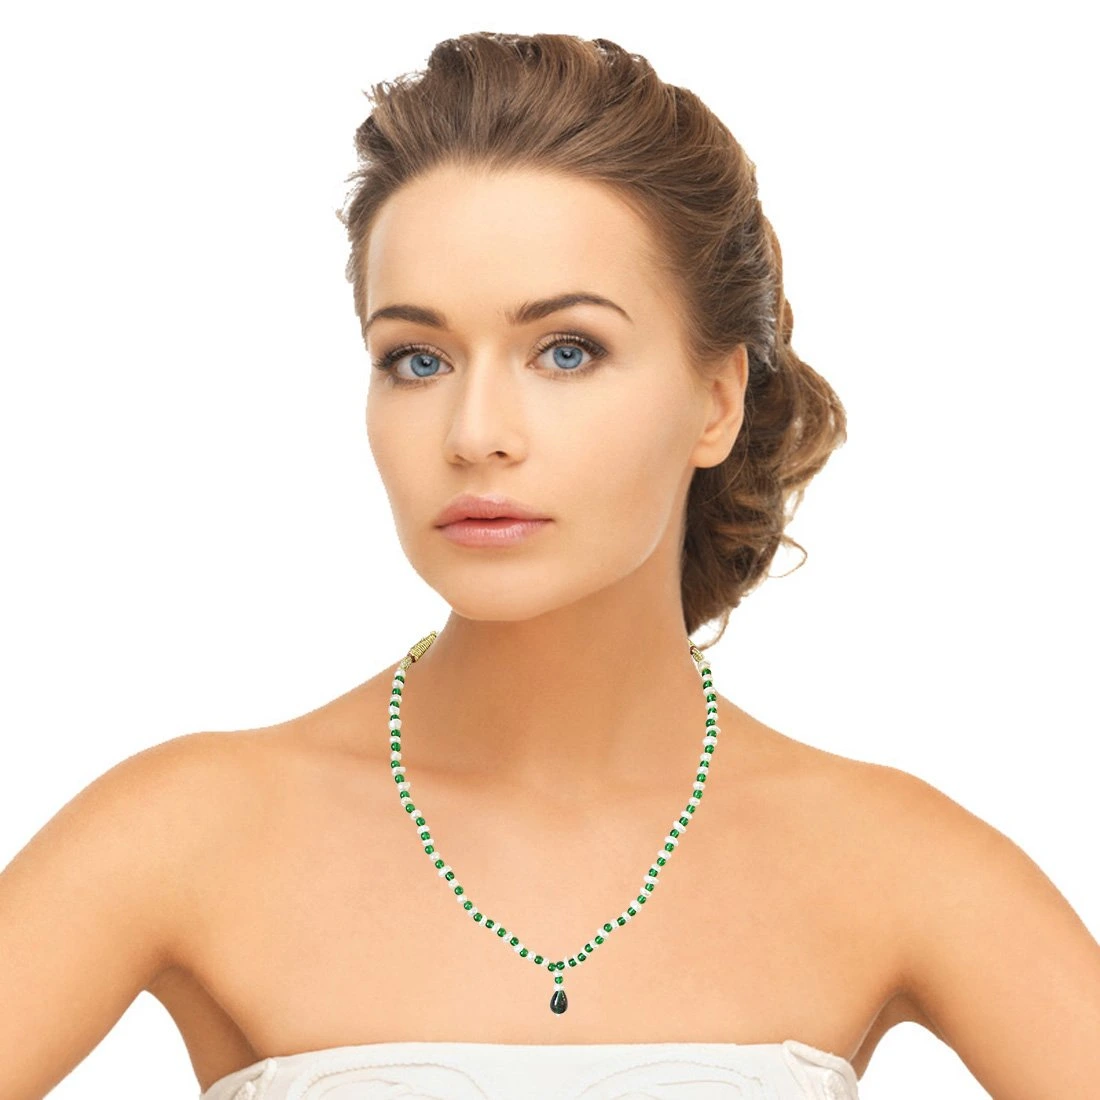 Green Colored Stone and Freshwater Pearl Necklace for Women (SN585)